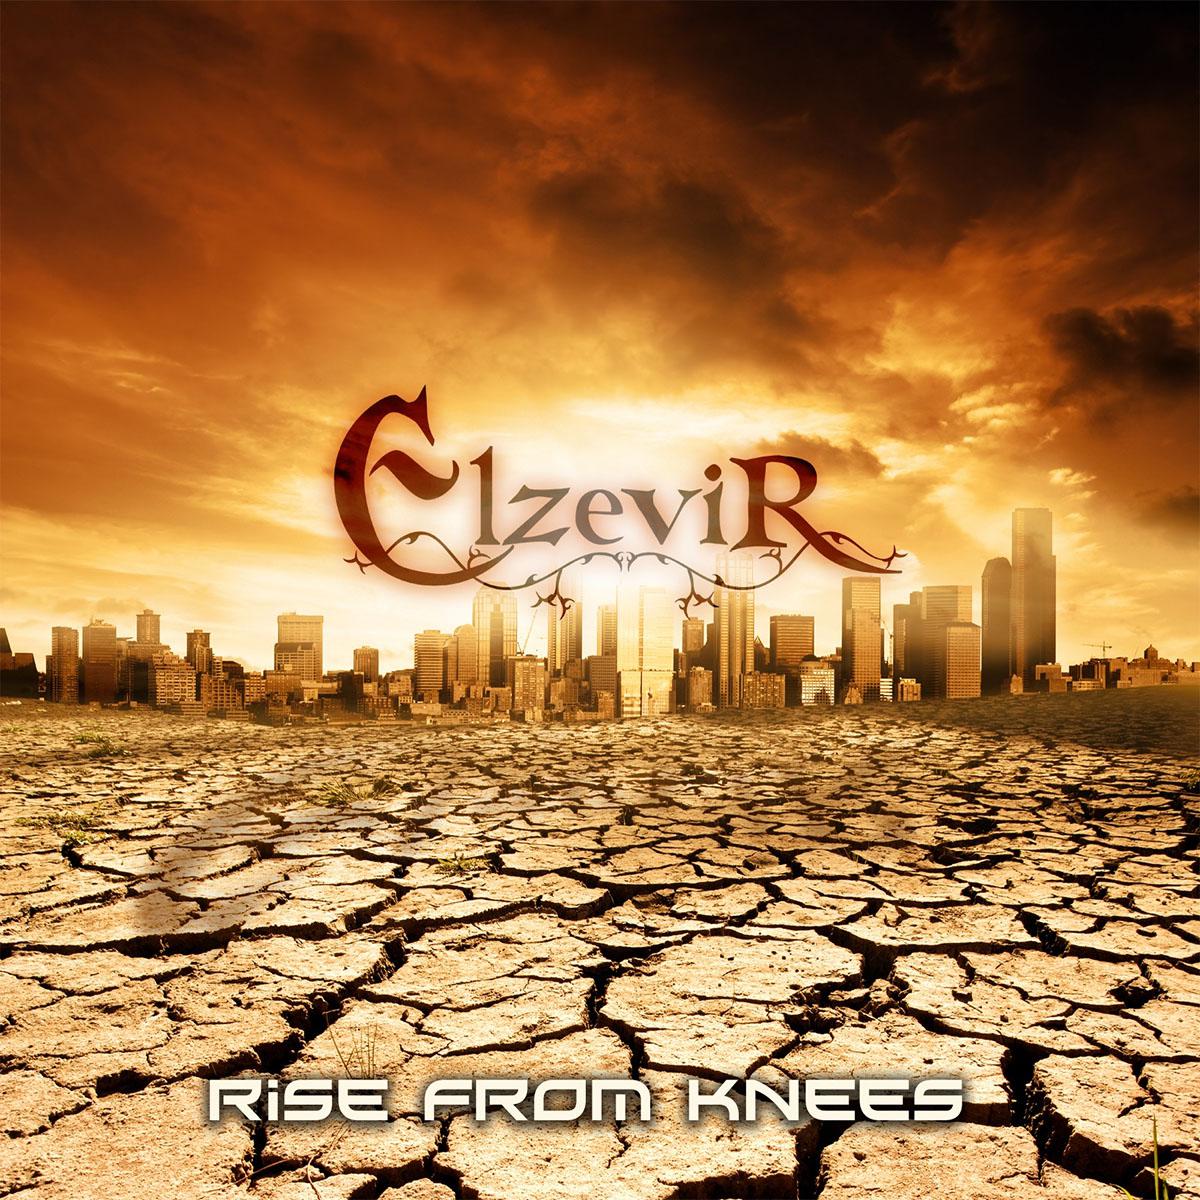 Elzevir - Rise From Knees (2011)  (Lossless+Mp3)